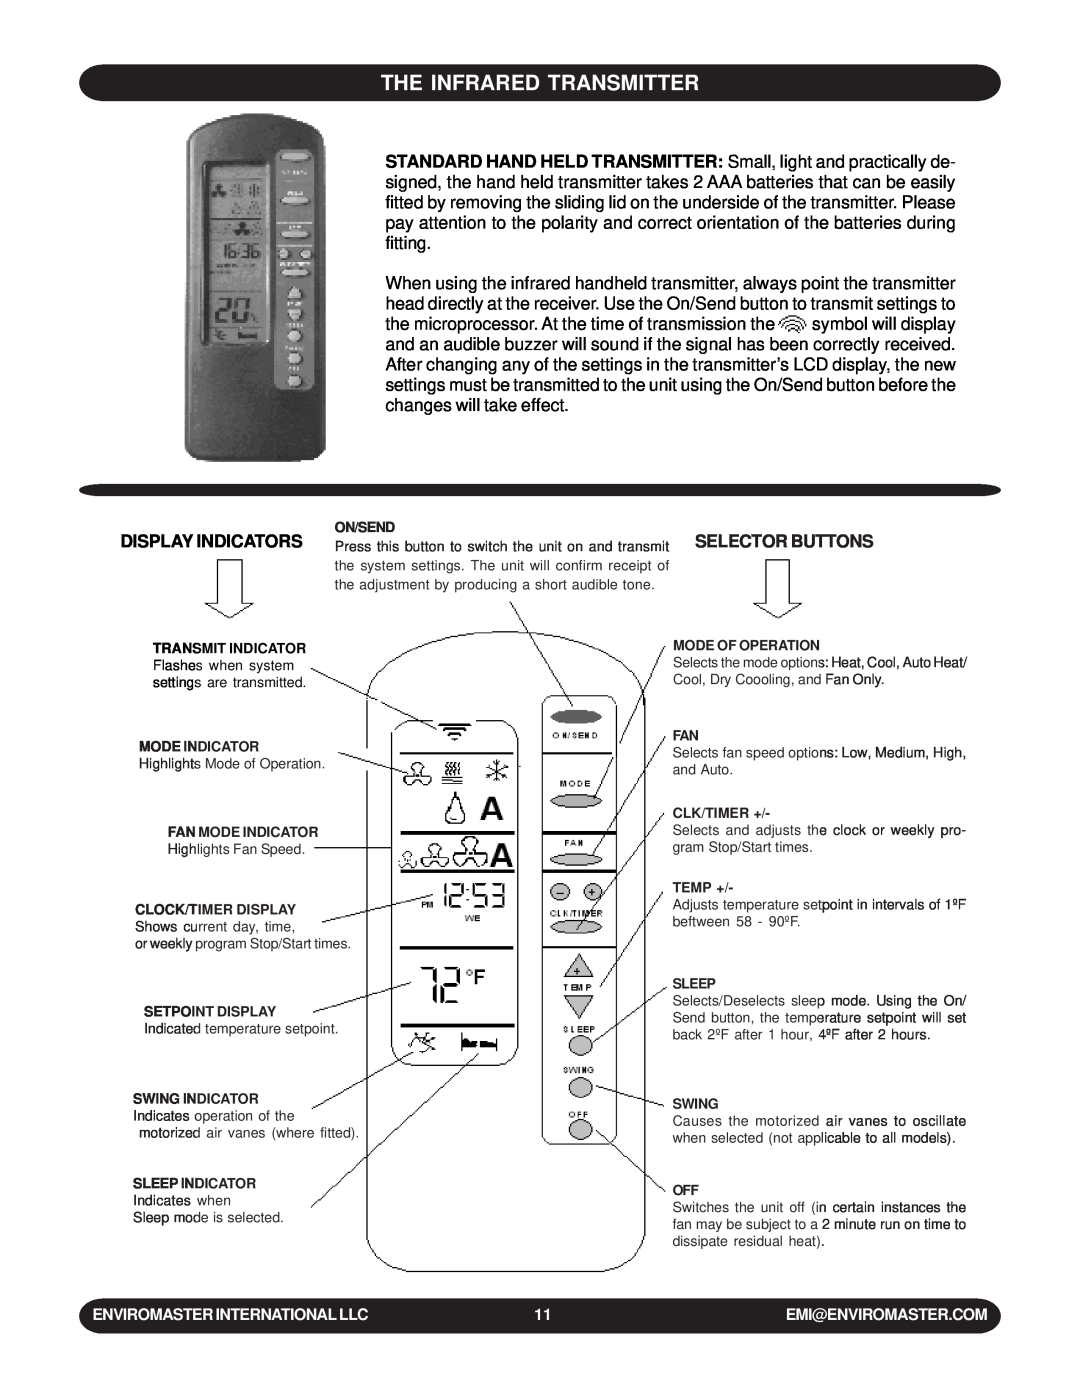 EMI WLCA installation manual The Infrared Transmitter, Display Indicators, Selector Buttons 